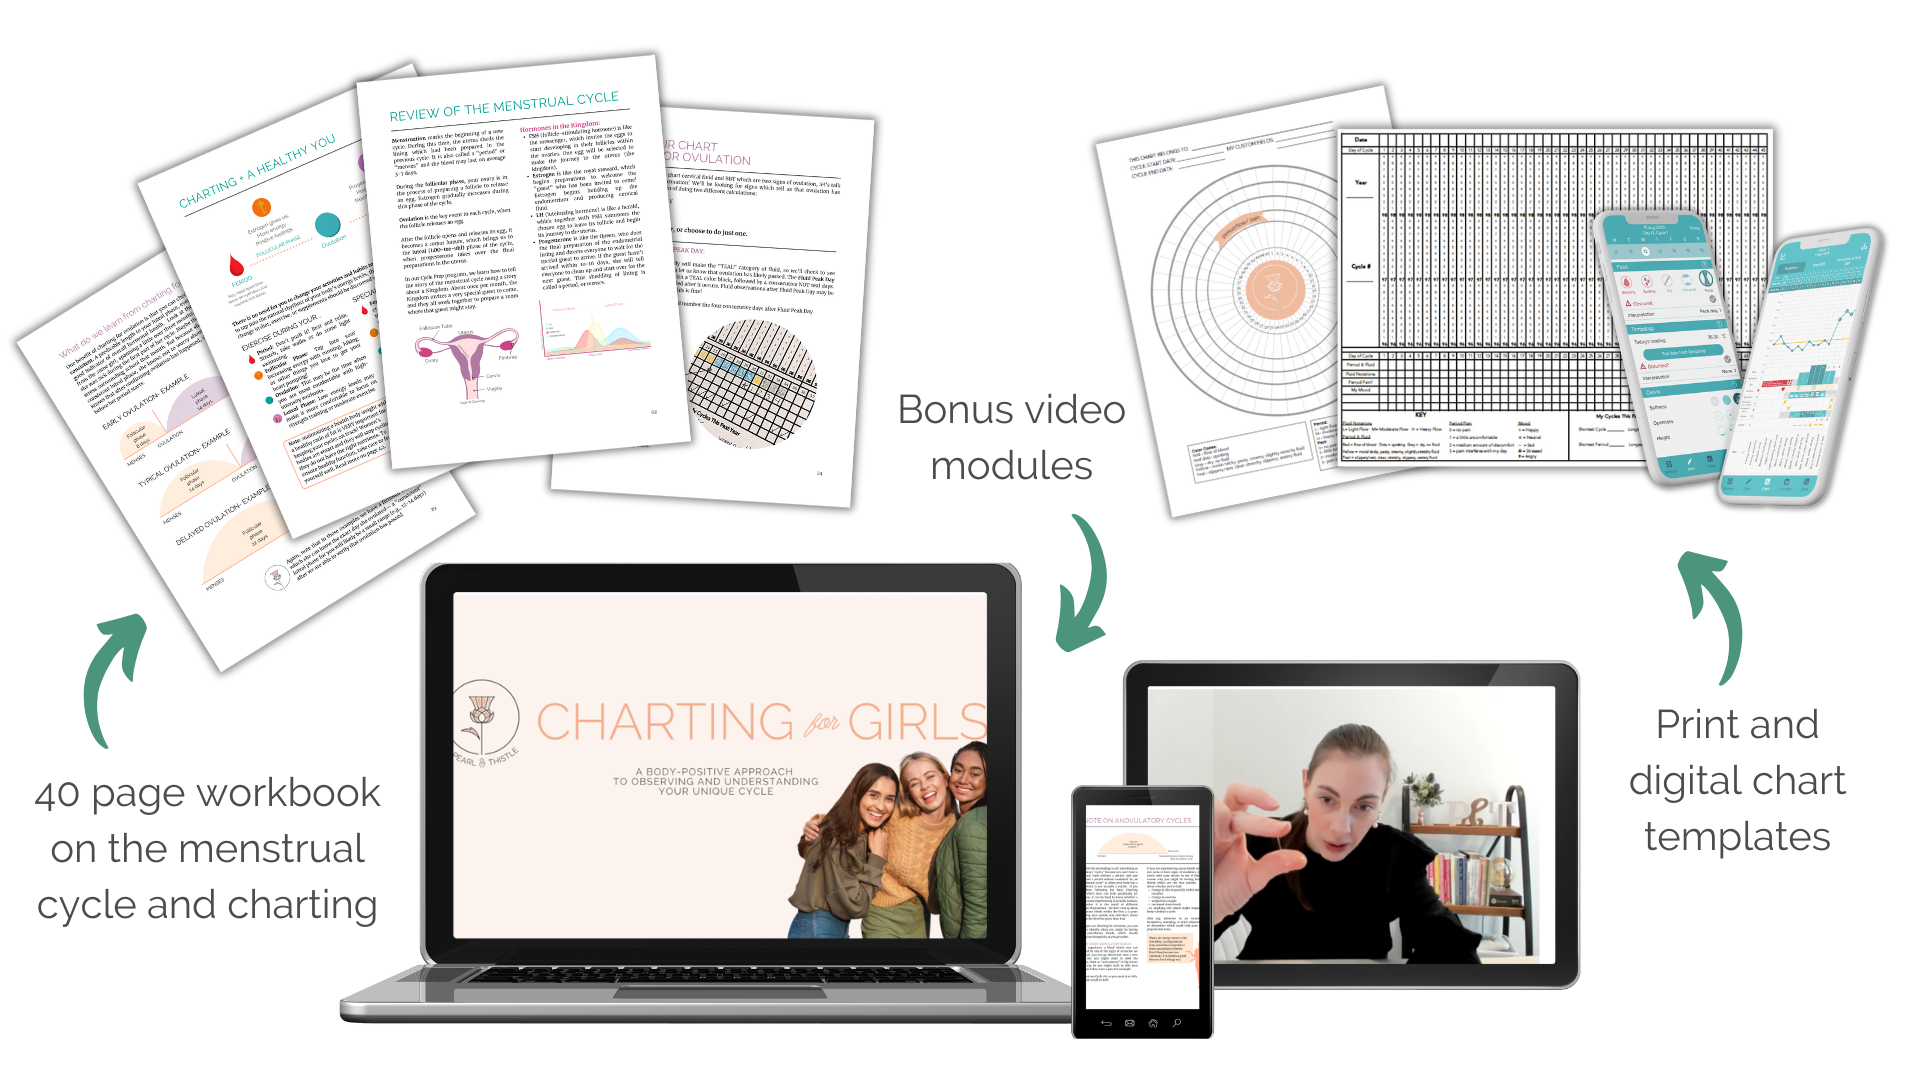 Four worksheets, laptop with main Charting for Girls slide, phone with infographic, woman in black shirt showing two fingers, additional handouts, and phones. The words 40 page workbook on the menstrual cycle and charting, bonus video modules, and print and digital chart templates with green arrows appears.